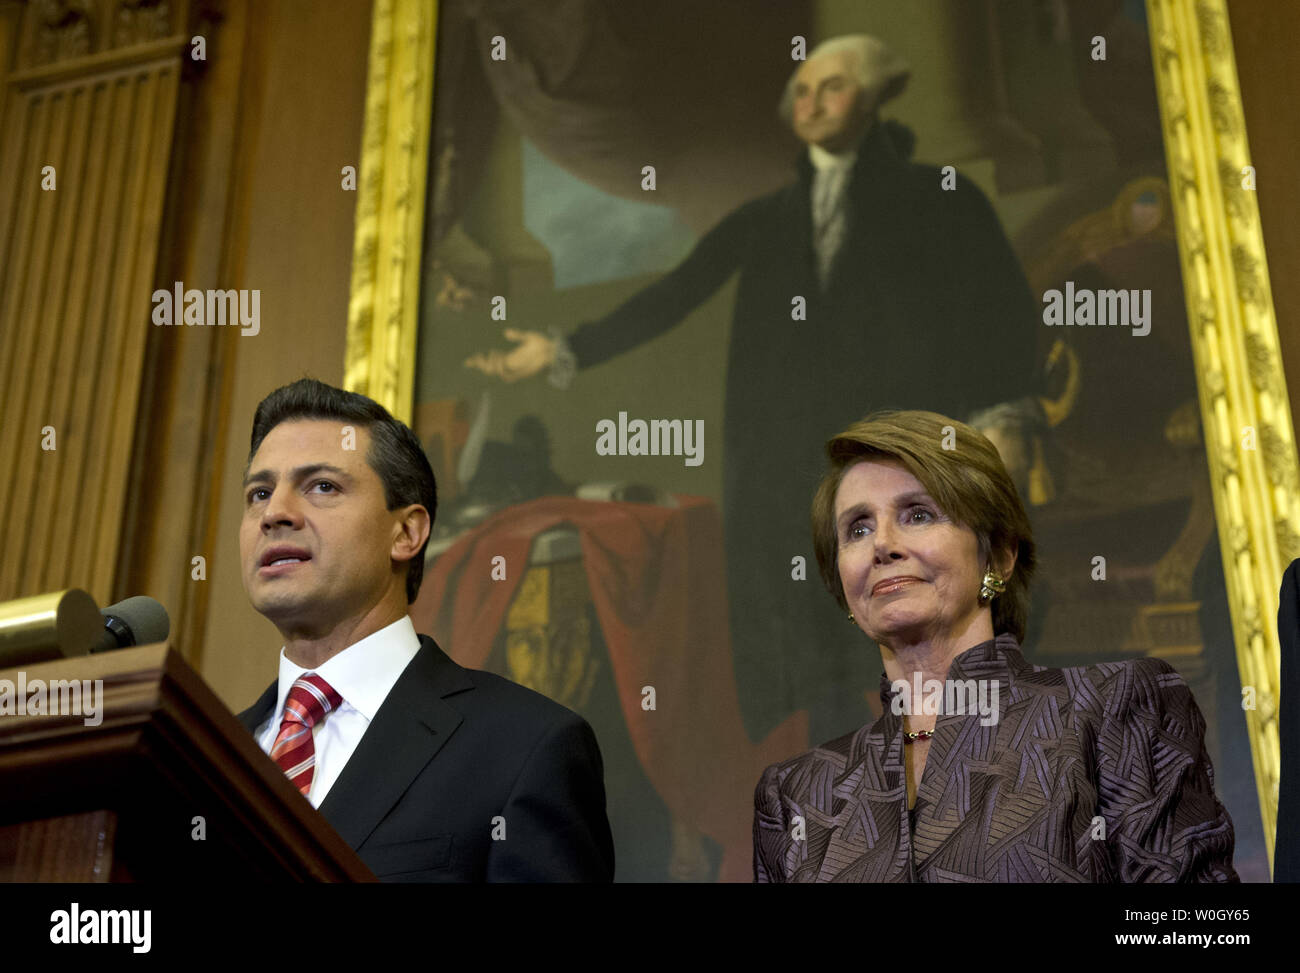 Mexican President-elect Enrique Pena Nieto speaks alongside House Minority Leader Nancy Pelosi (D-CA) during a media availability on Capitol Hill in Washington, DC on November 27, 2012.  UPI/Kevin Dietsch Stock Photo